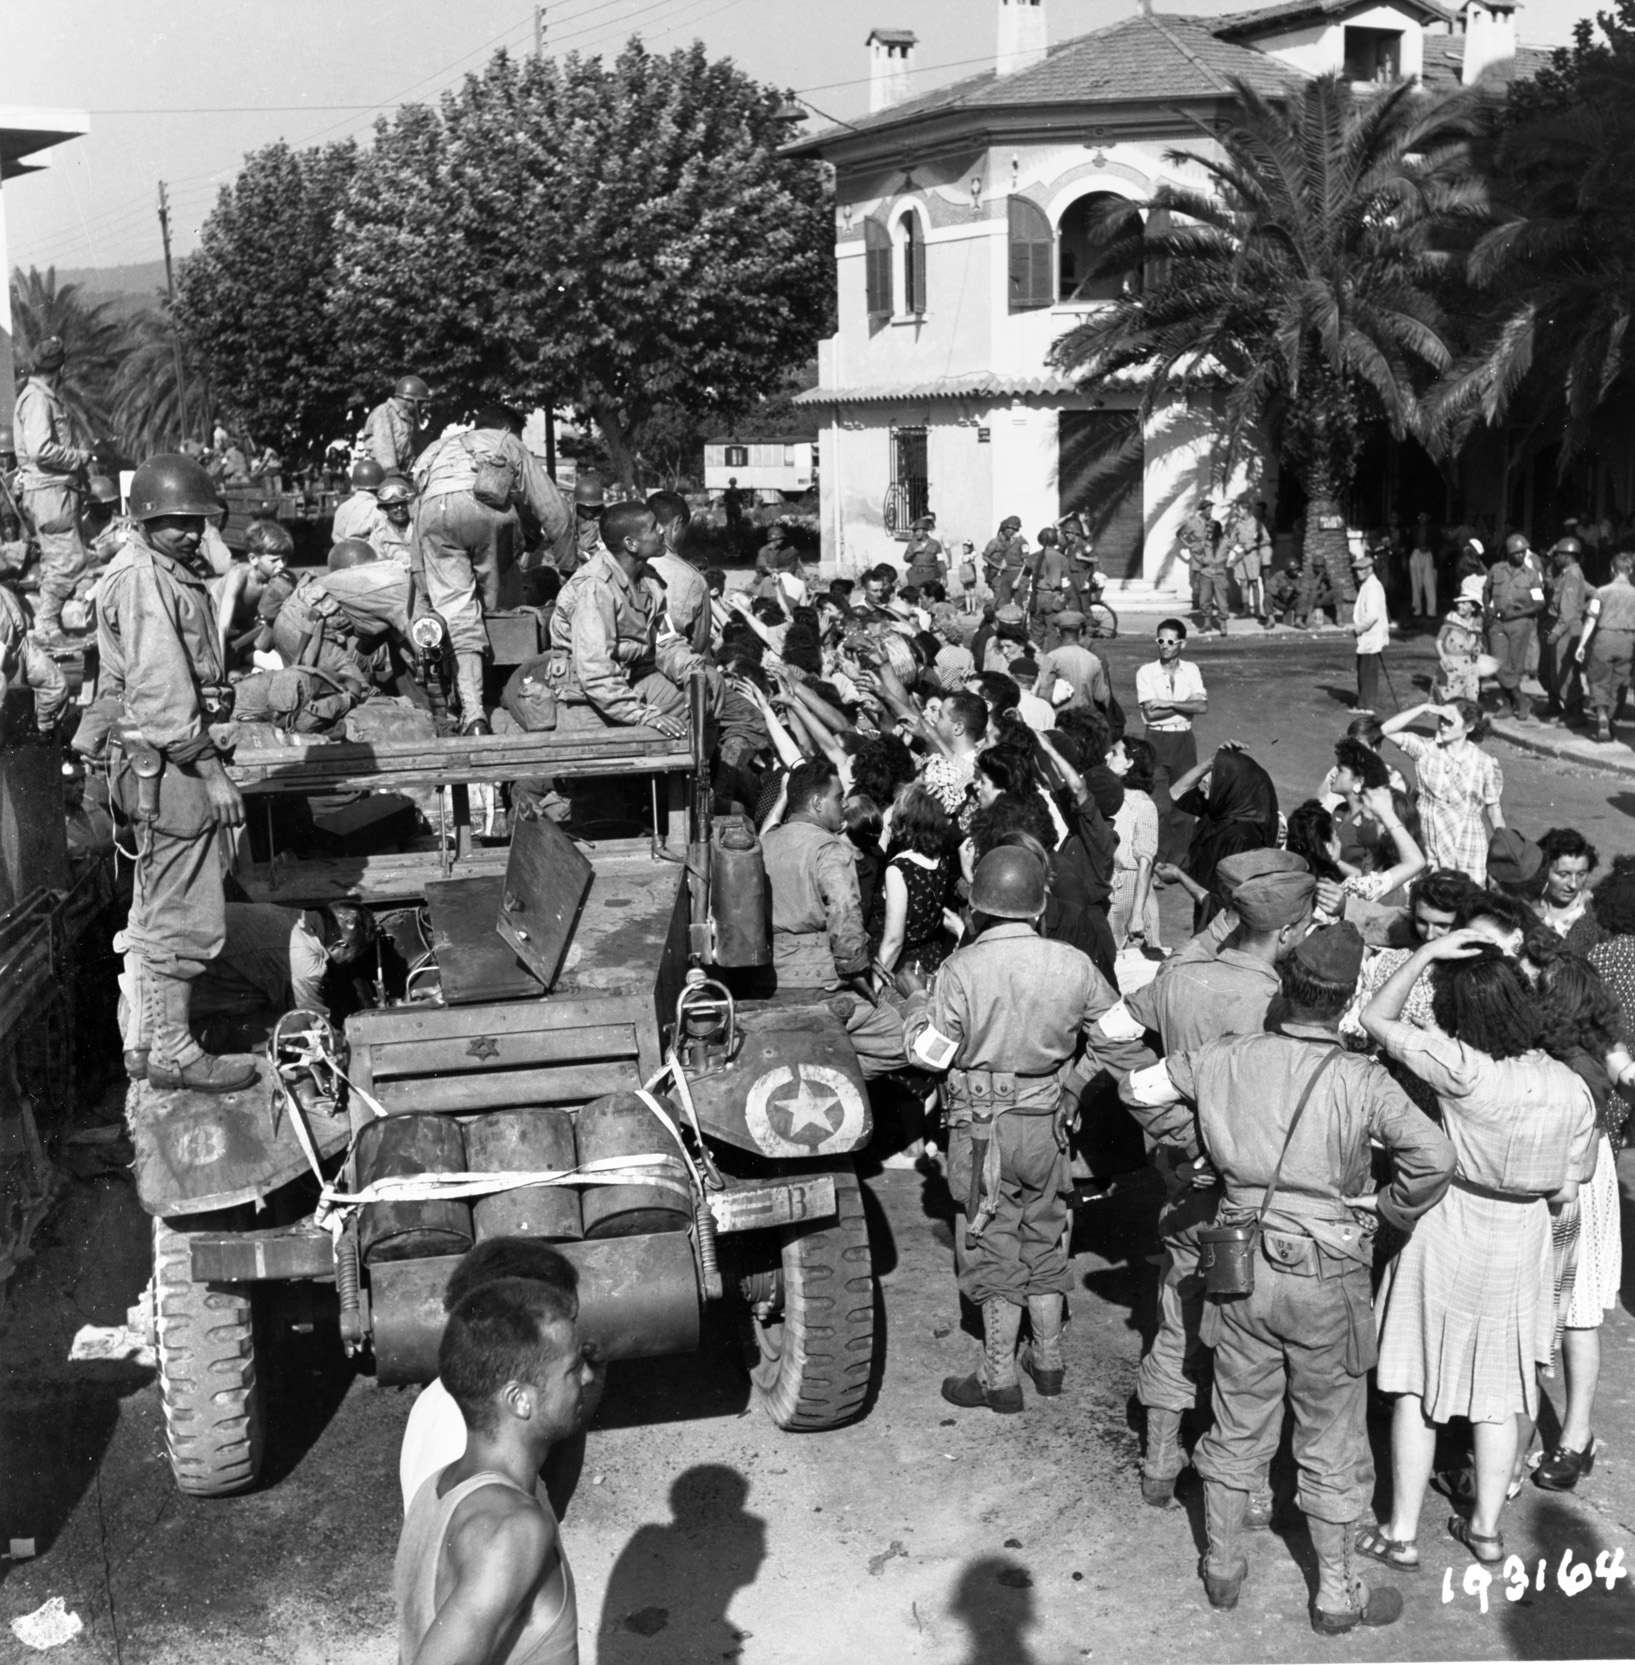 A crowd of civilians in the town of St. Maxime, France, welcomes a French tank-destroyer unit on August 16, 1944. They are wearing American uniforms and equipped with American arms, including this halftrack mounting a .30-caliber machine gun.